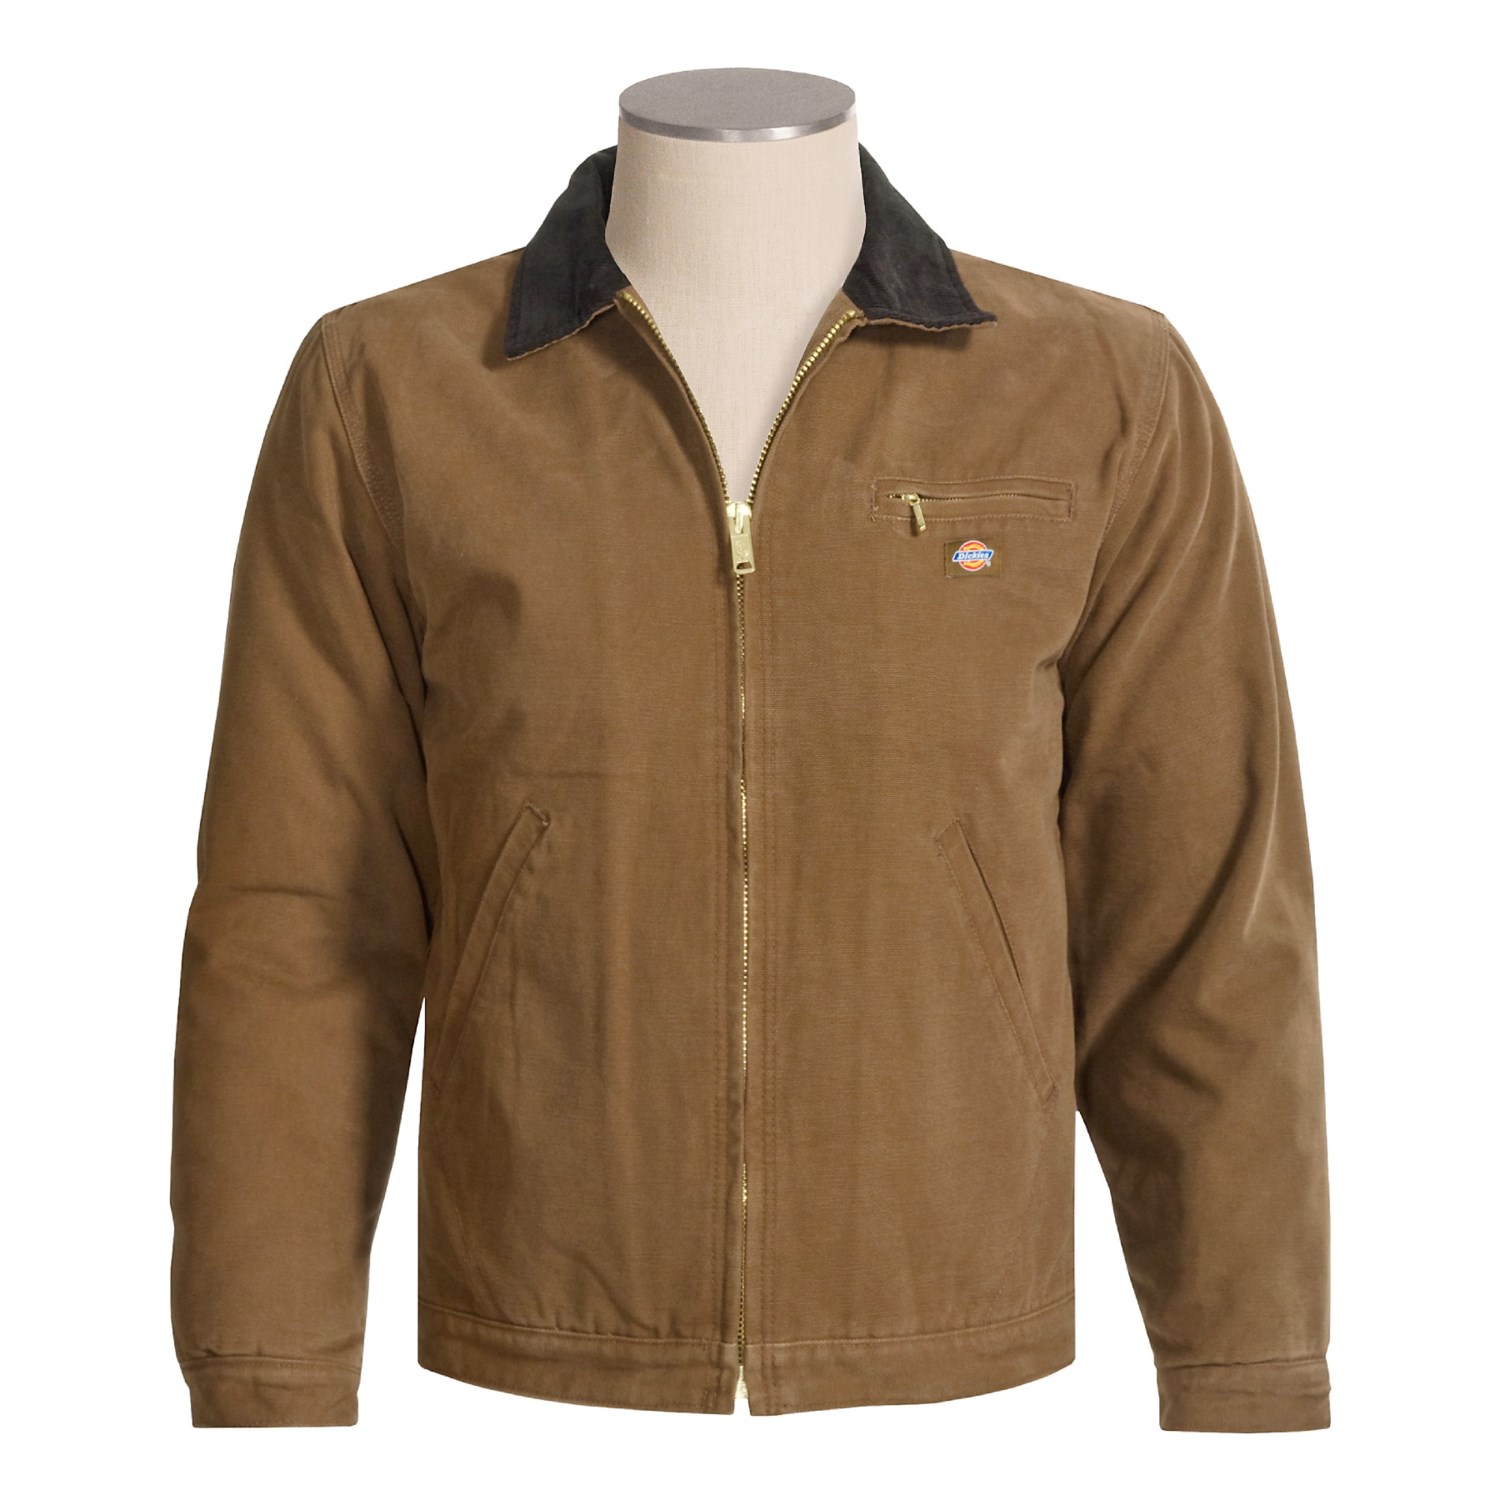 Dickies Cotton Duck Work Jacket (For Men and Tall Men) 2266C - Save 60%